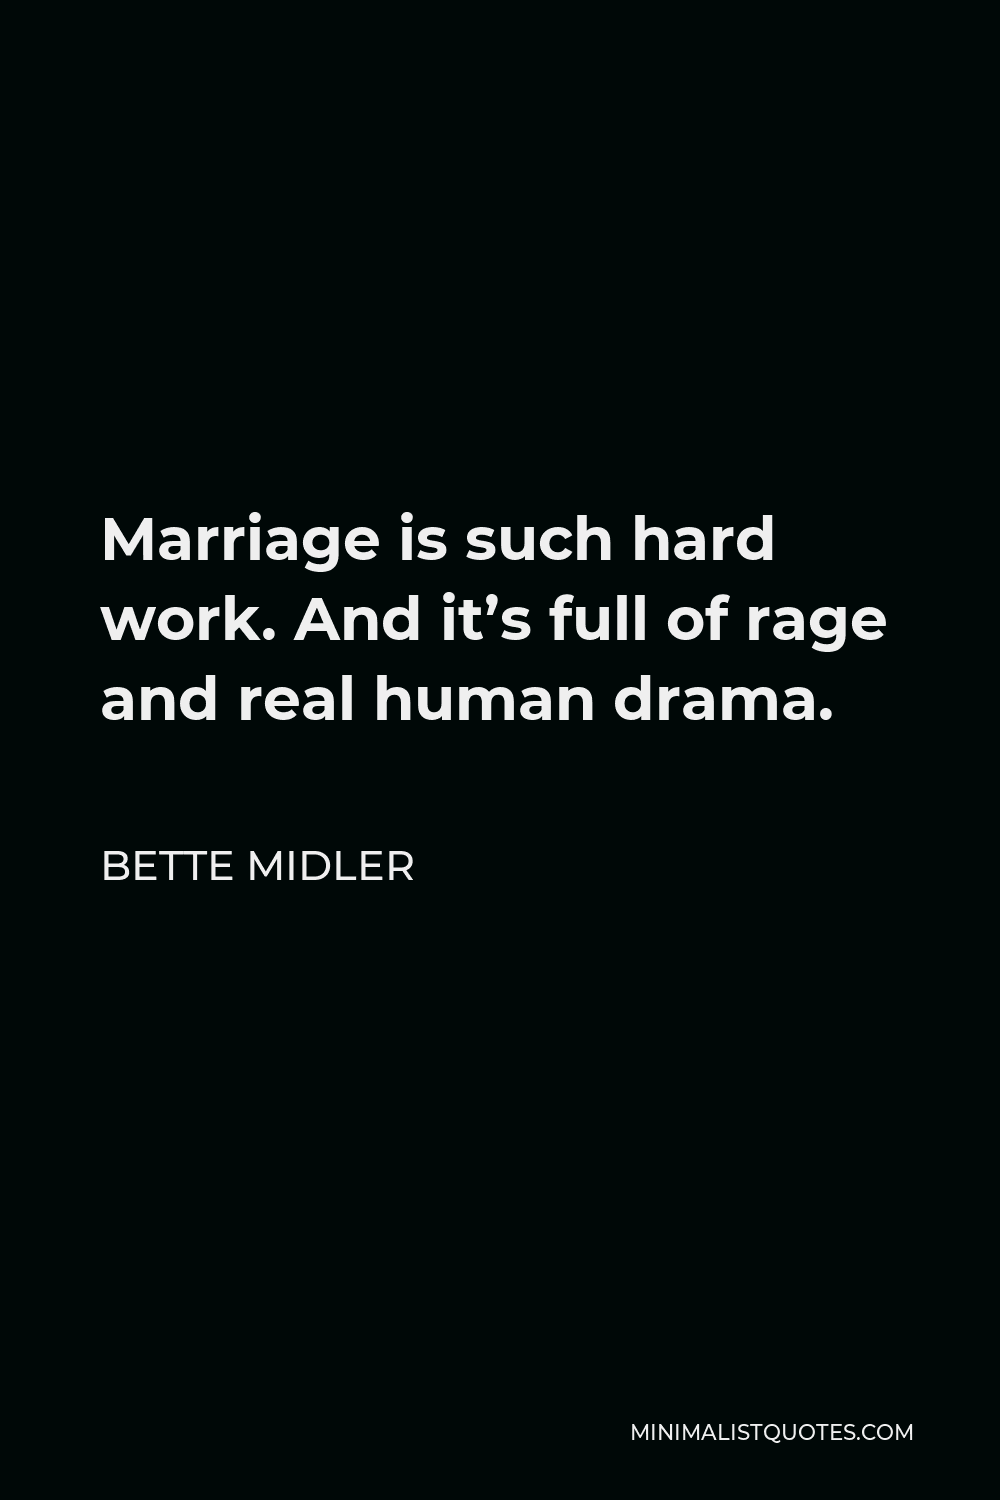 Bette Midler Quote - Marriage is such hard work. And it’s full of rage and real human drama.